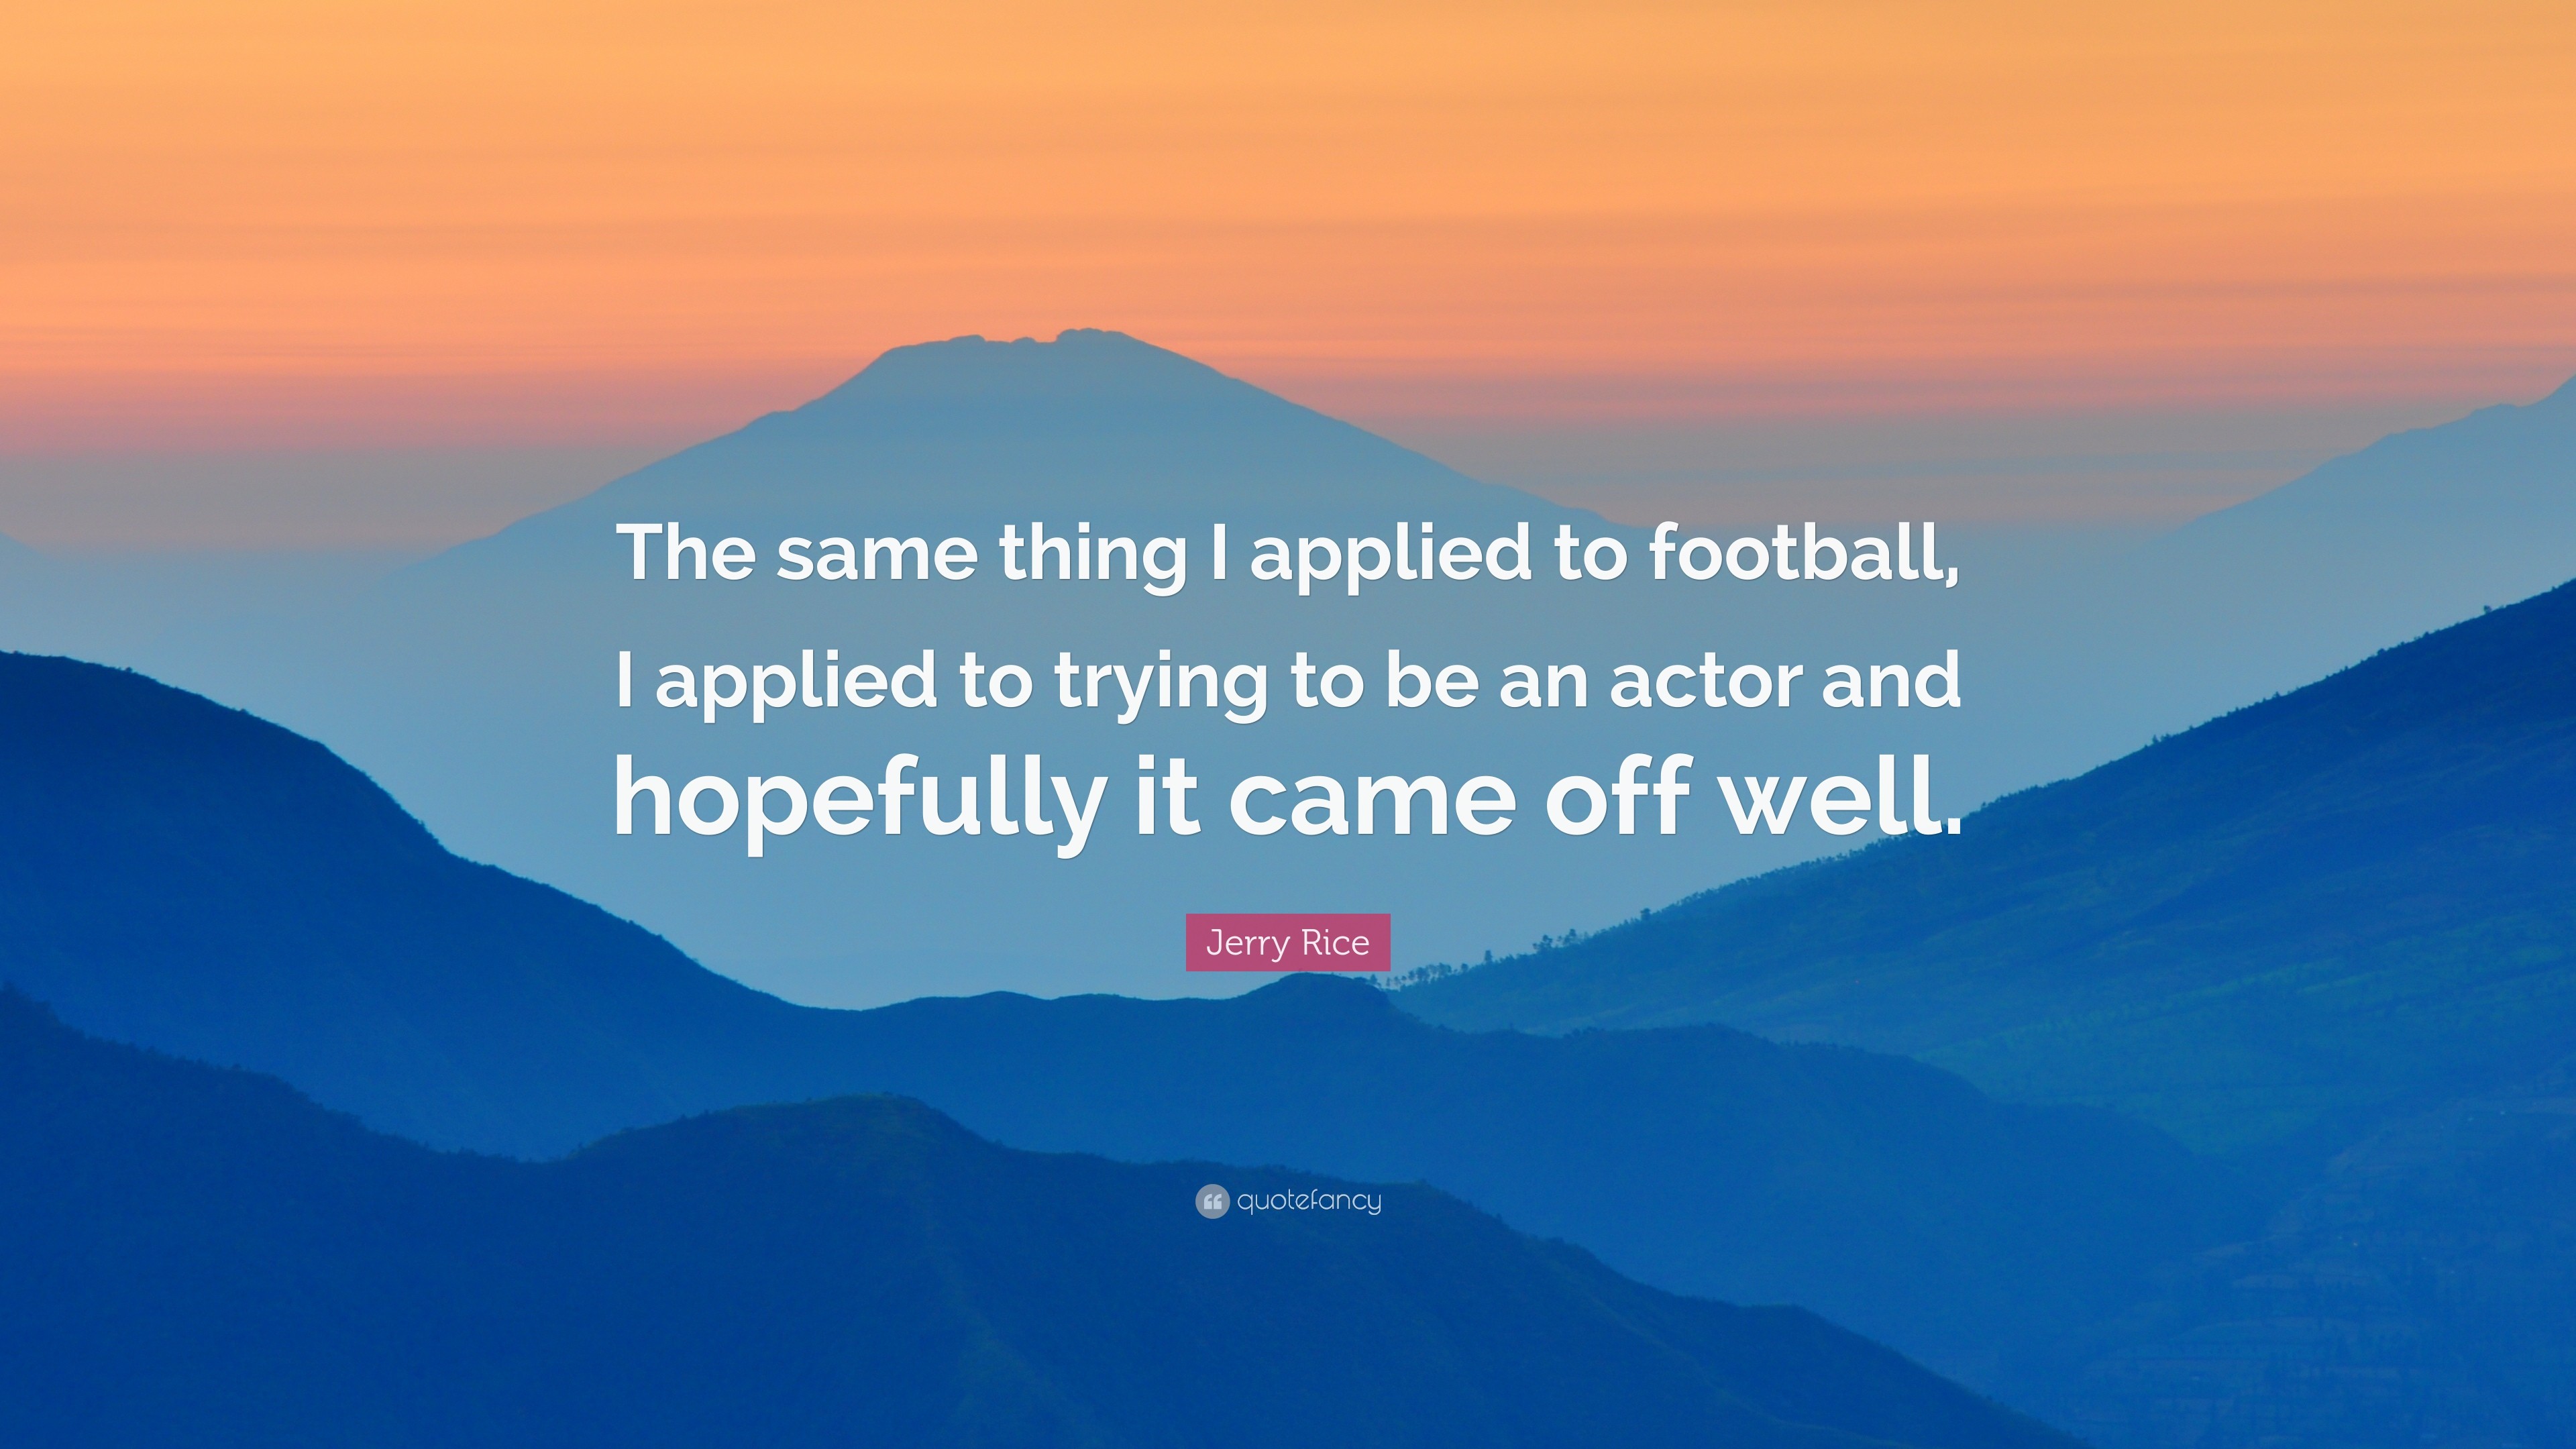 Jerry Rice Quote: “The same thing I applied to football, I applied to